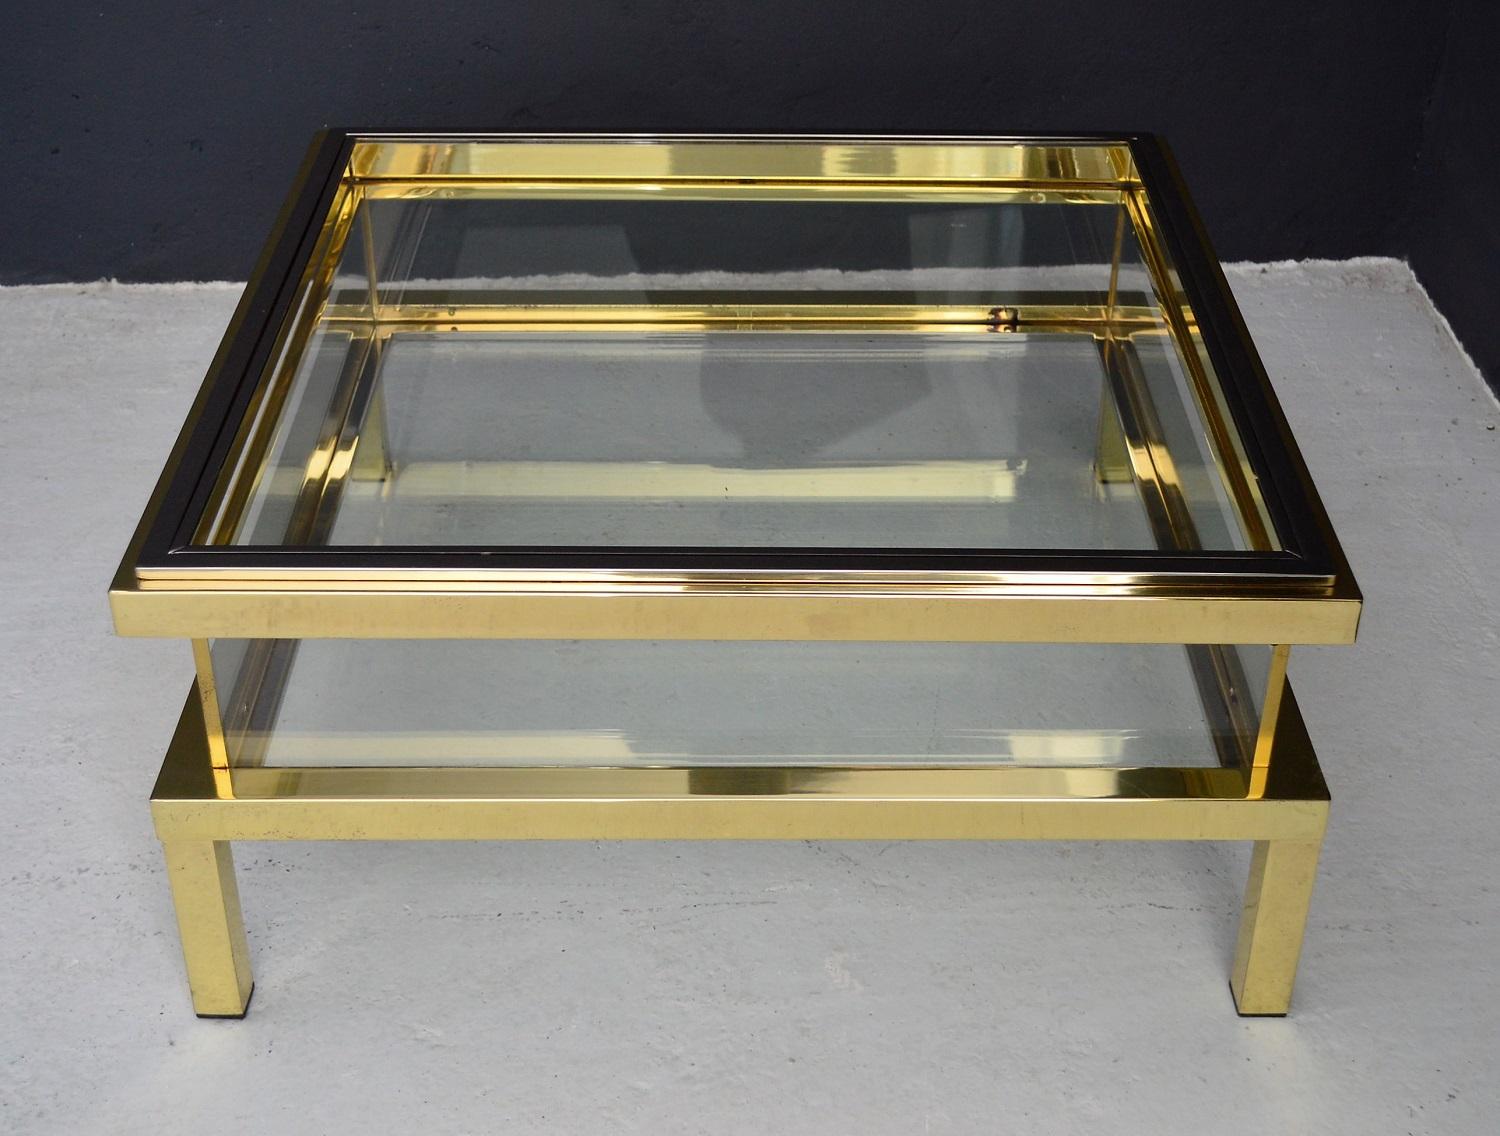 French Regency Brass Coffee Table with Slide-On Showcase by Maison Jansen, 1970s (Hollywood Regency)